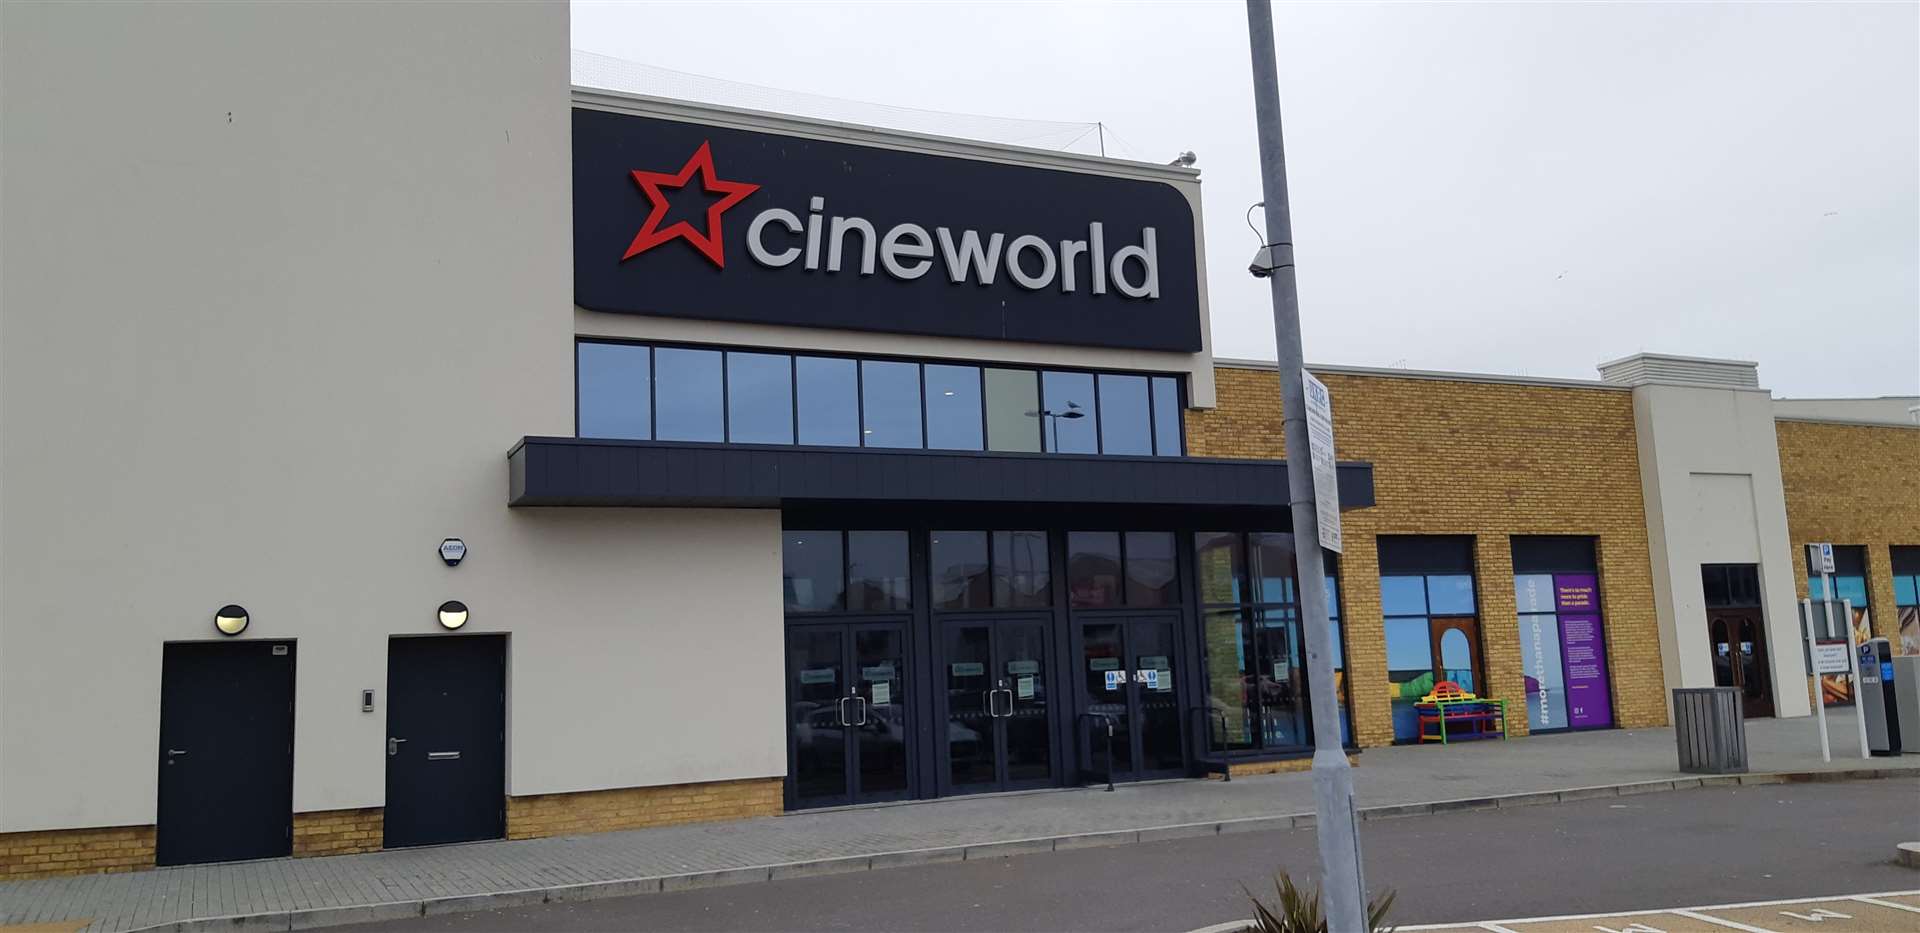 Cineworld at Dover is also back in business this week